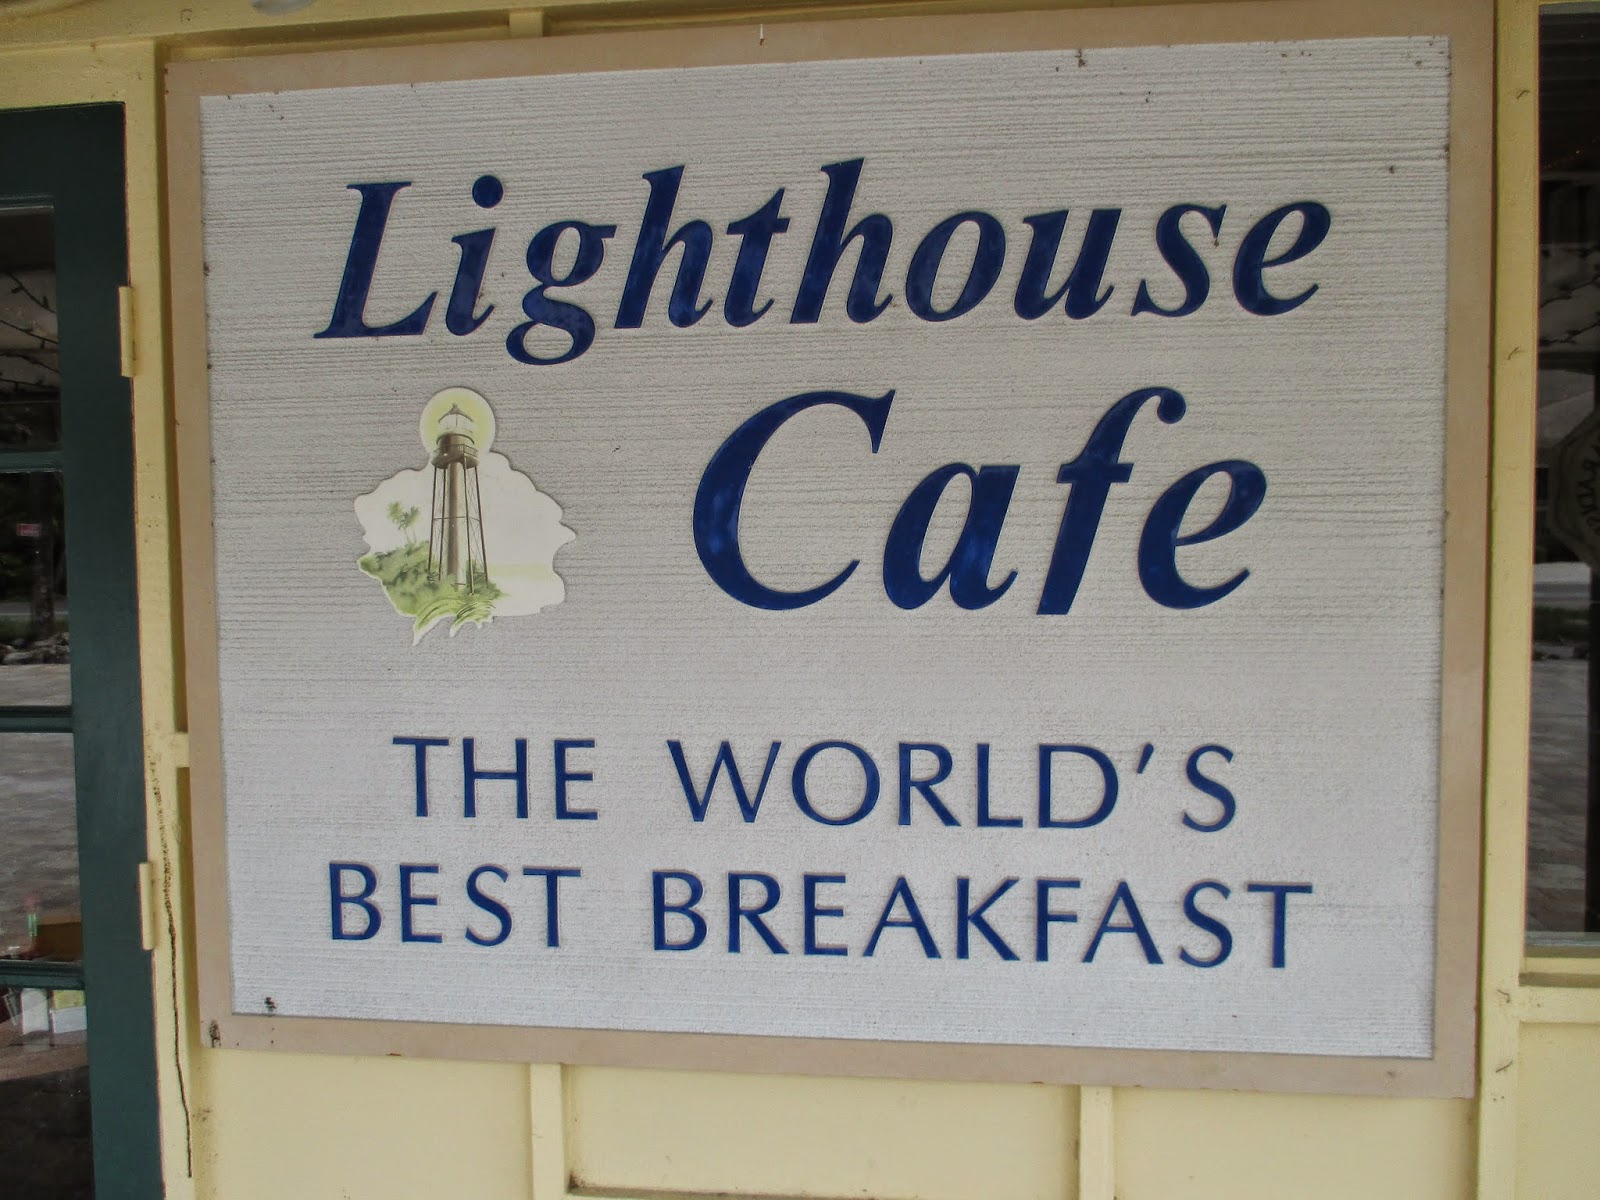 Cool Pa and Gator Moma Head to Key Sanibel Island - The Lighthouse, Breakfast and Some Crafty Lady